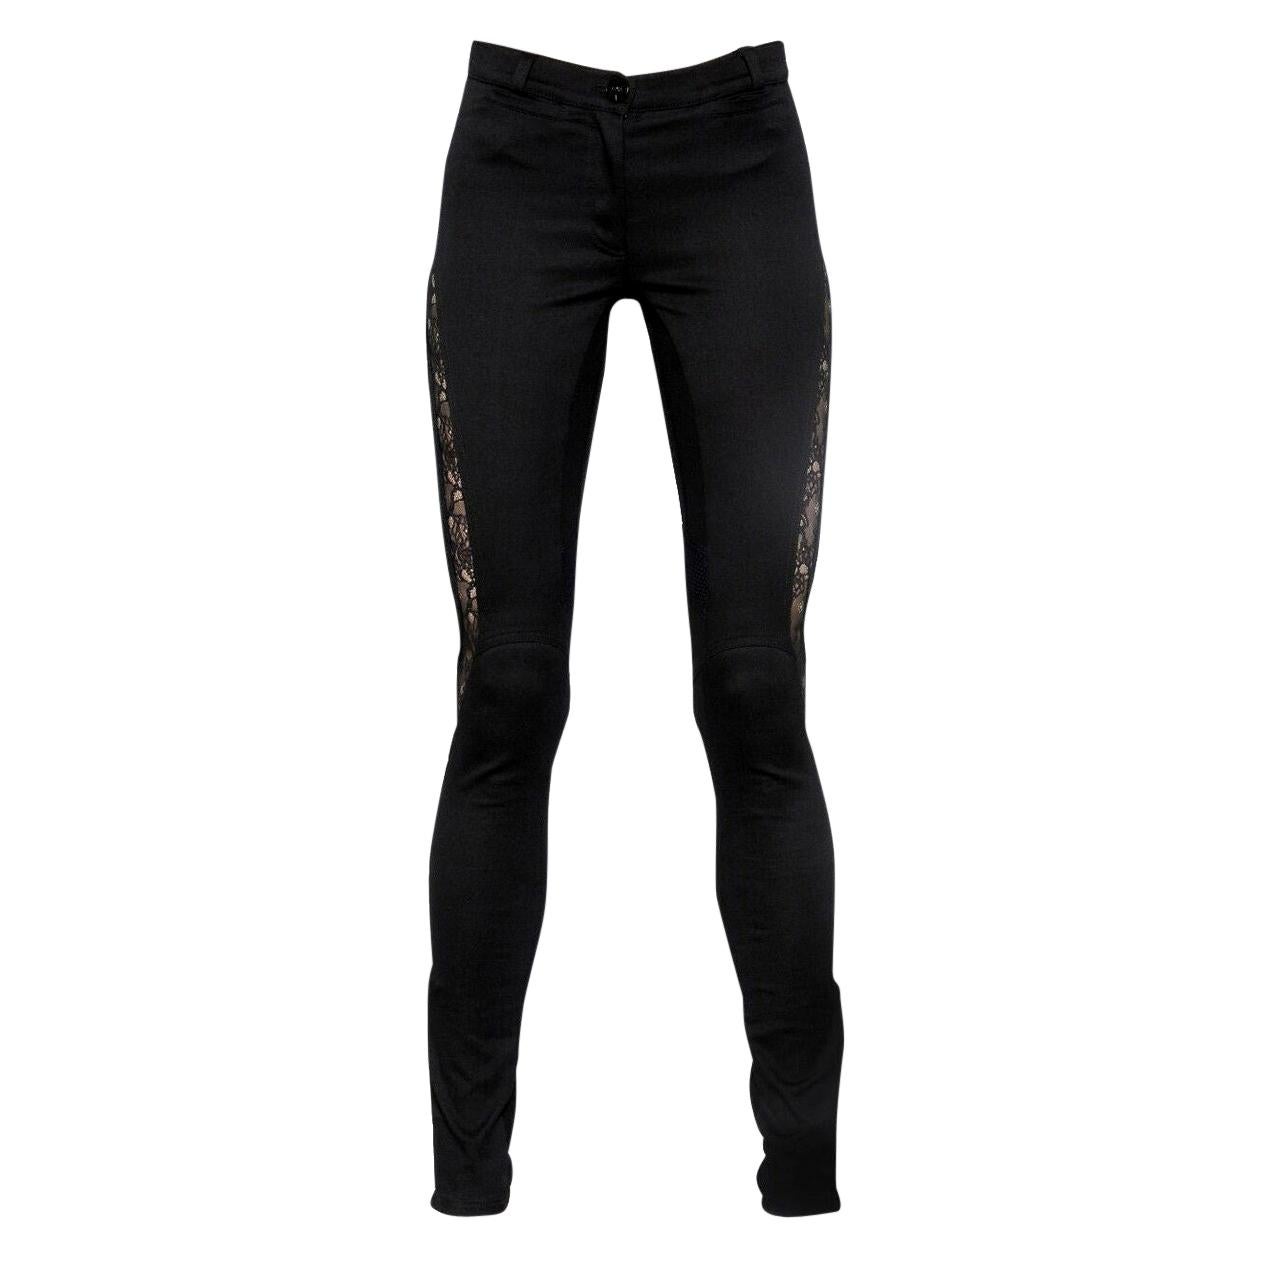 New Versace Black Skinny Pants Jeans with Lace Inserts 